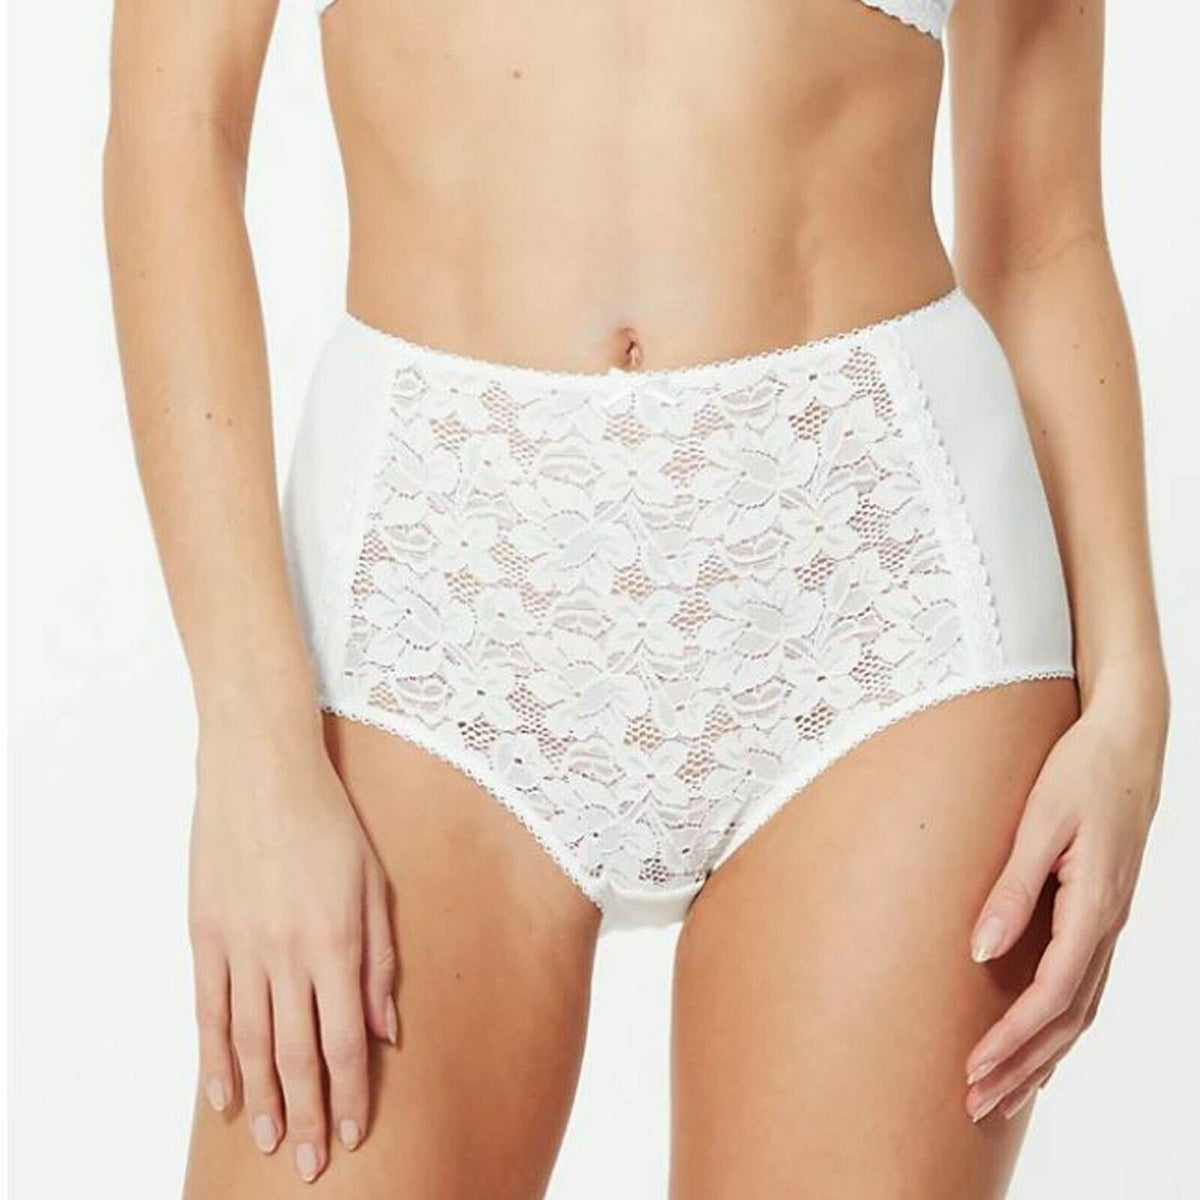 Ex Famous Store 3 Pack Full Brief Knickers Lace Front Cotton Blend